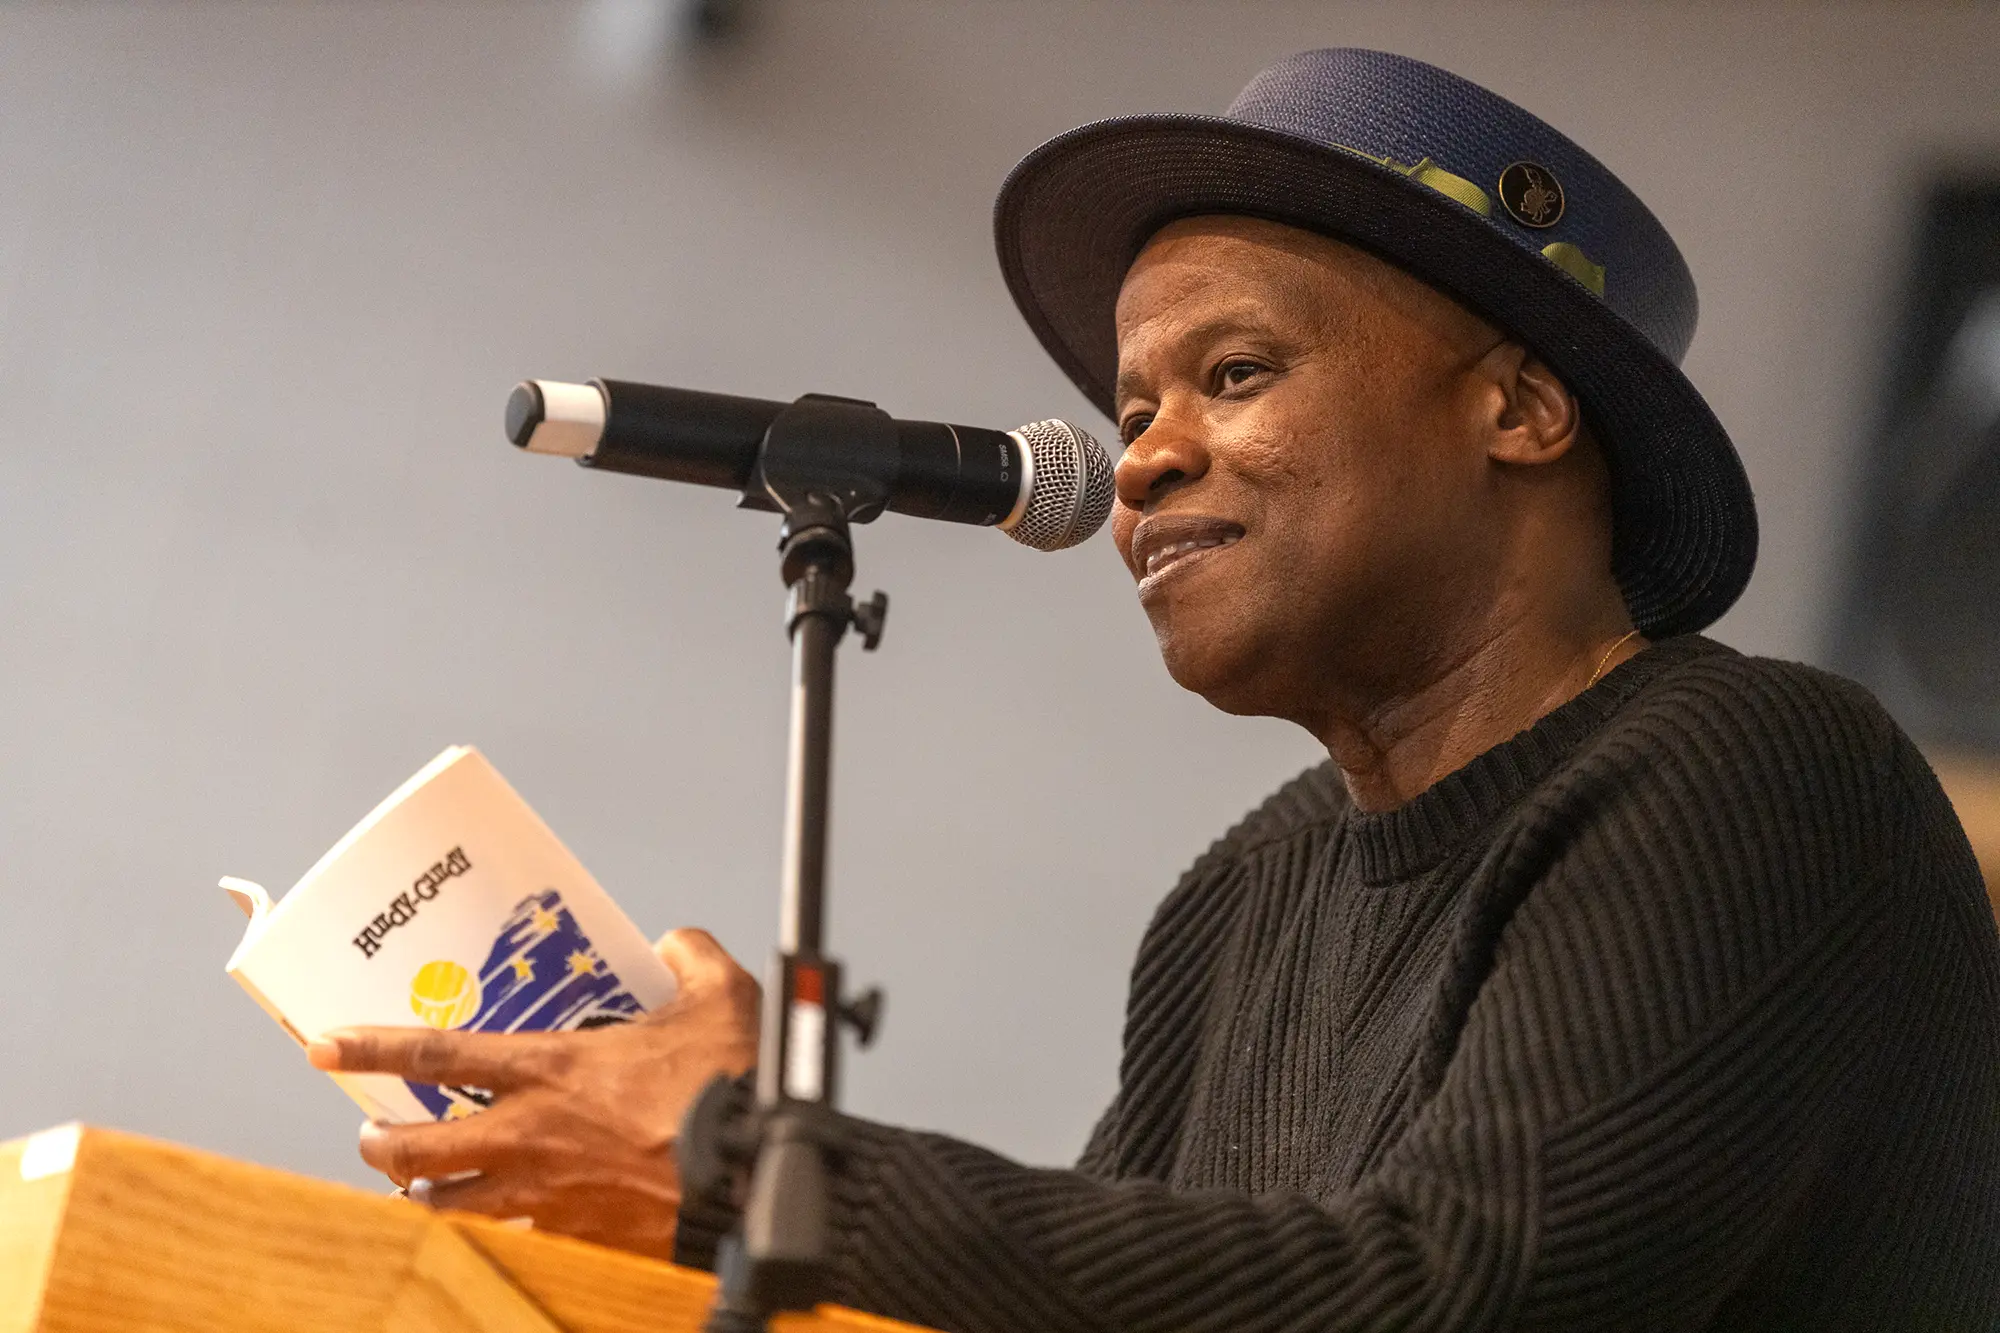 Poet Randall Horton wearing a navy boater hat and black sweater, smiles by a microphone at a podium, holding a copy of Hurdy Gurdy by Tim Seibles.